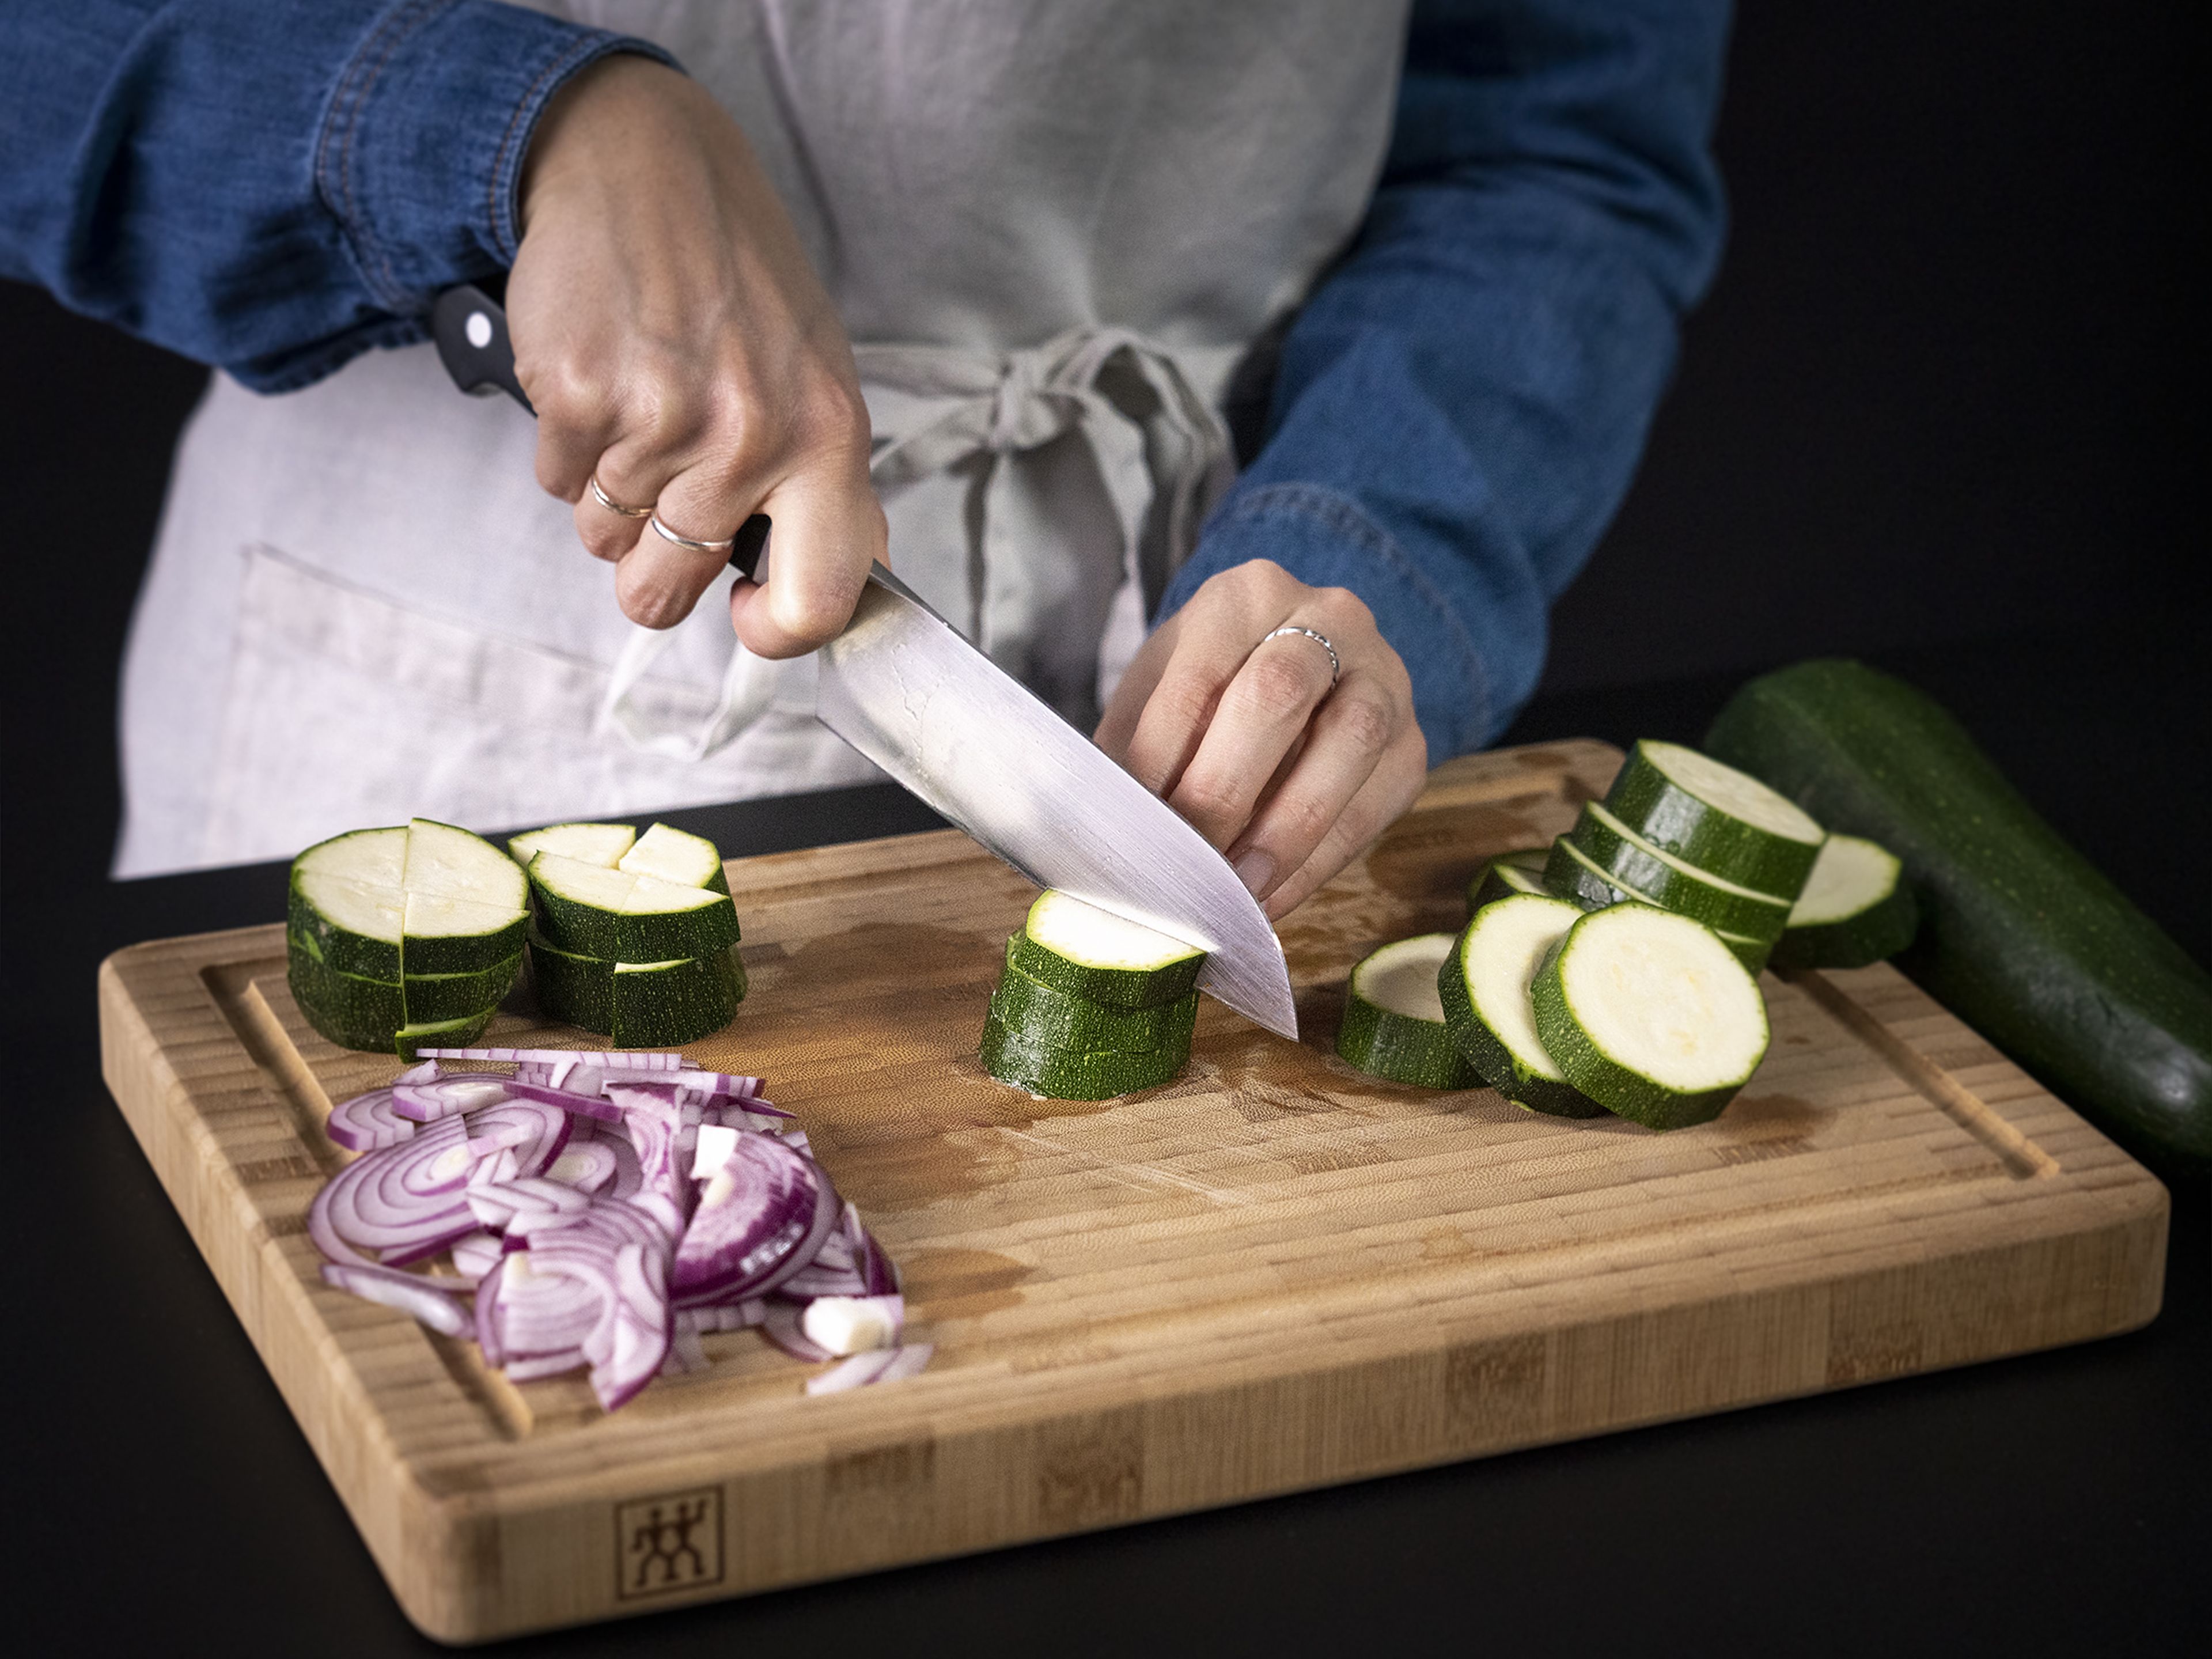 Peel and slice onion. Thickly slice zucchini and chop the slices into quarters. Drain and rinse the beans.